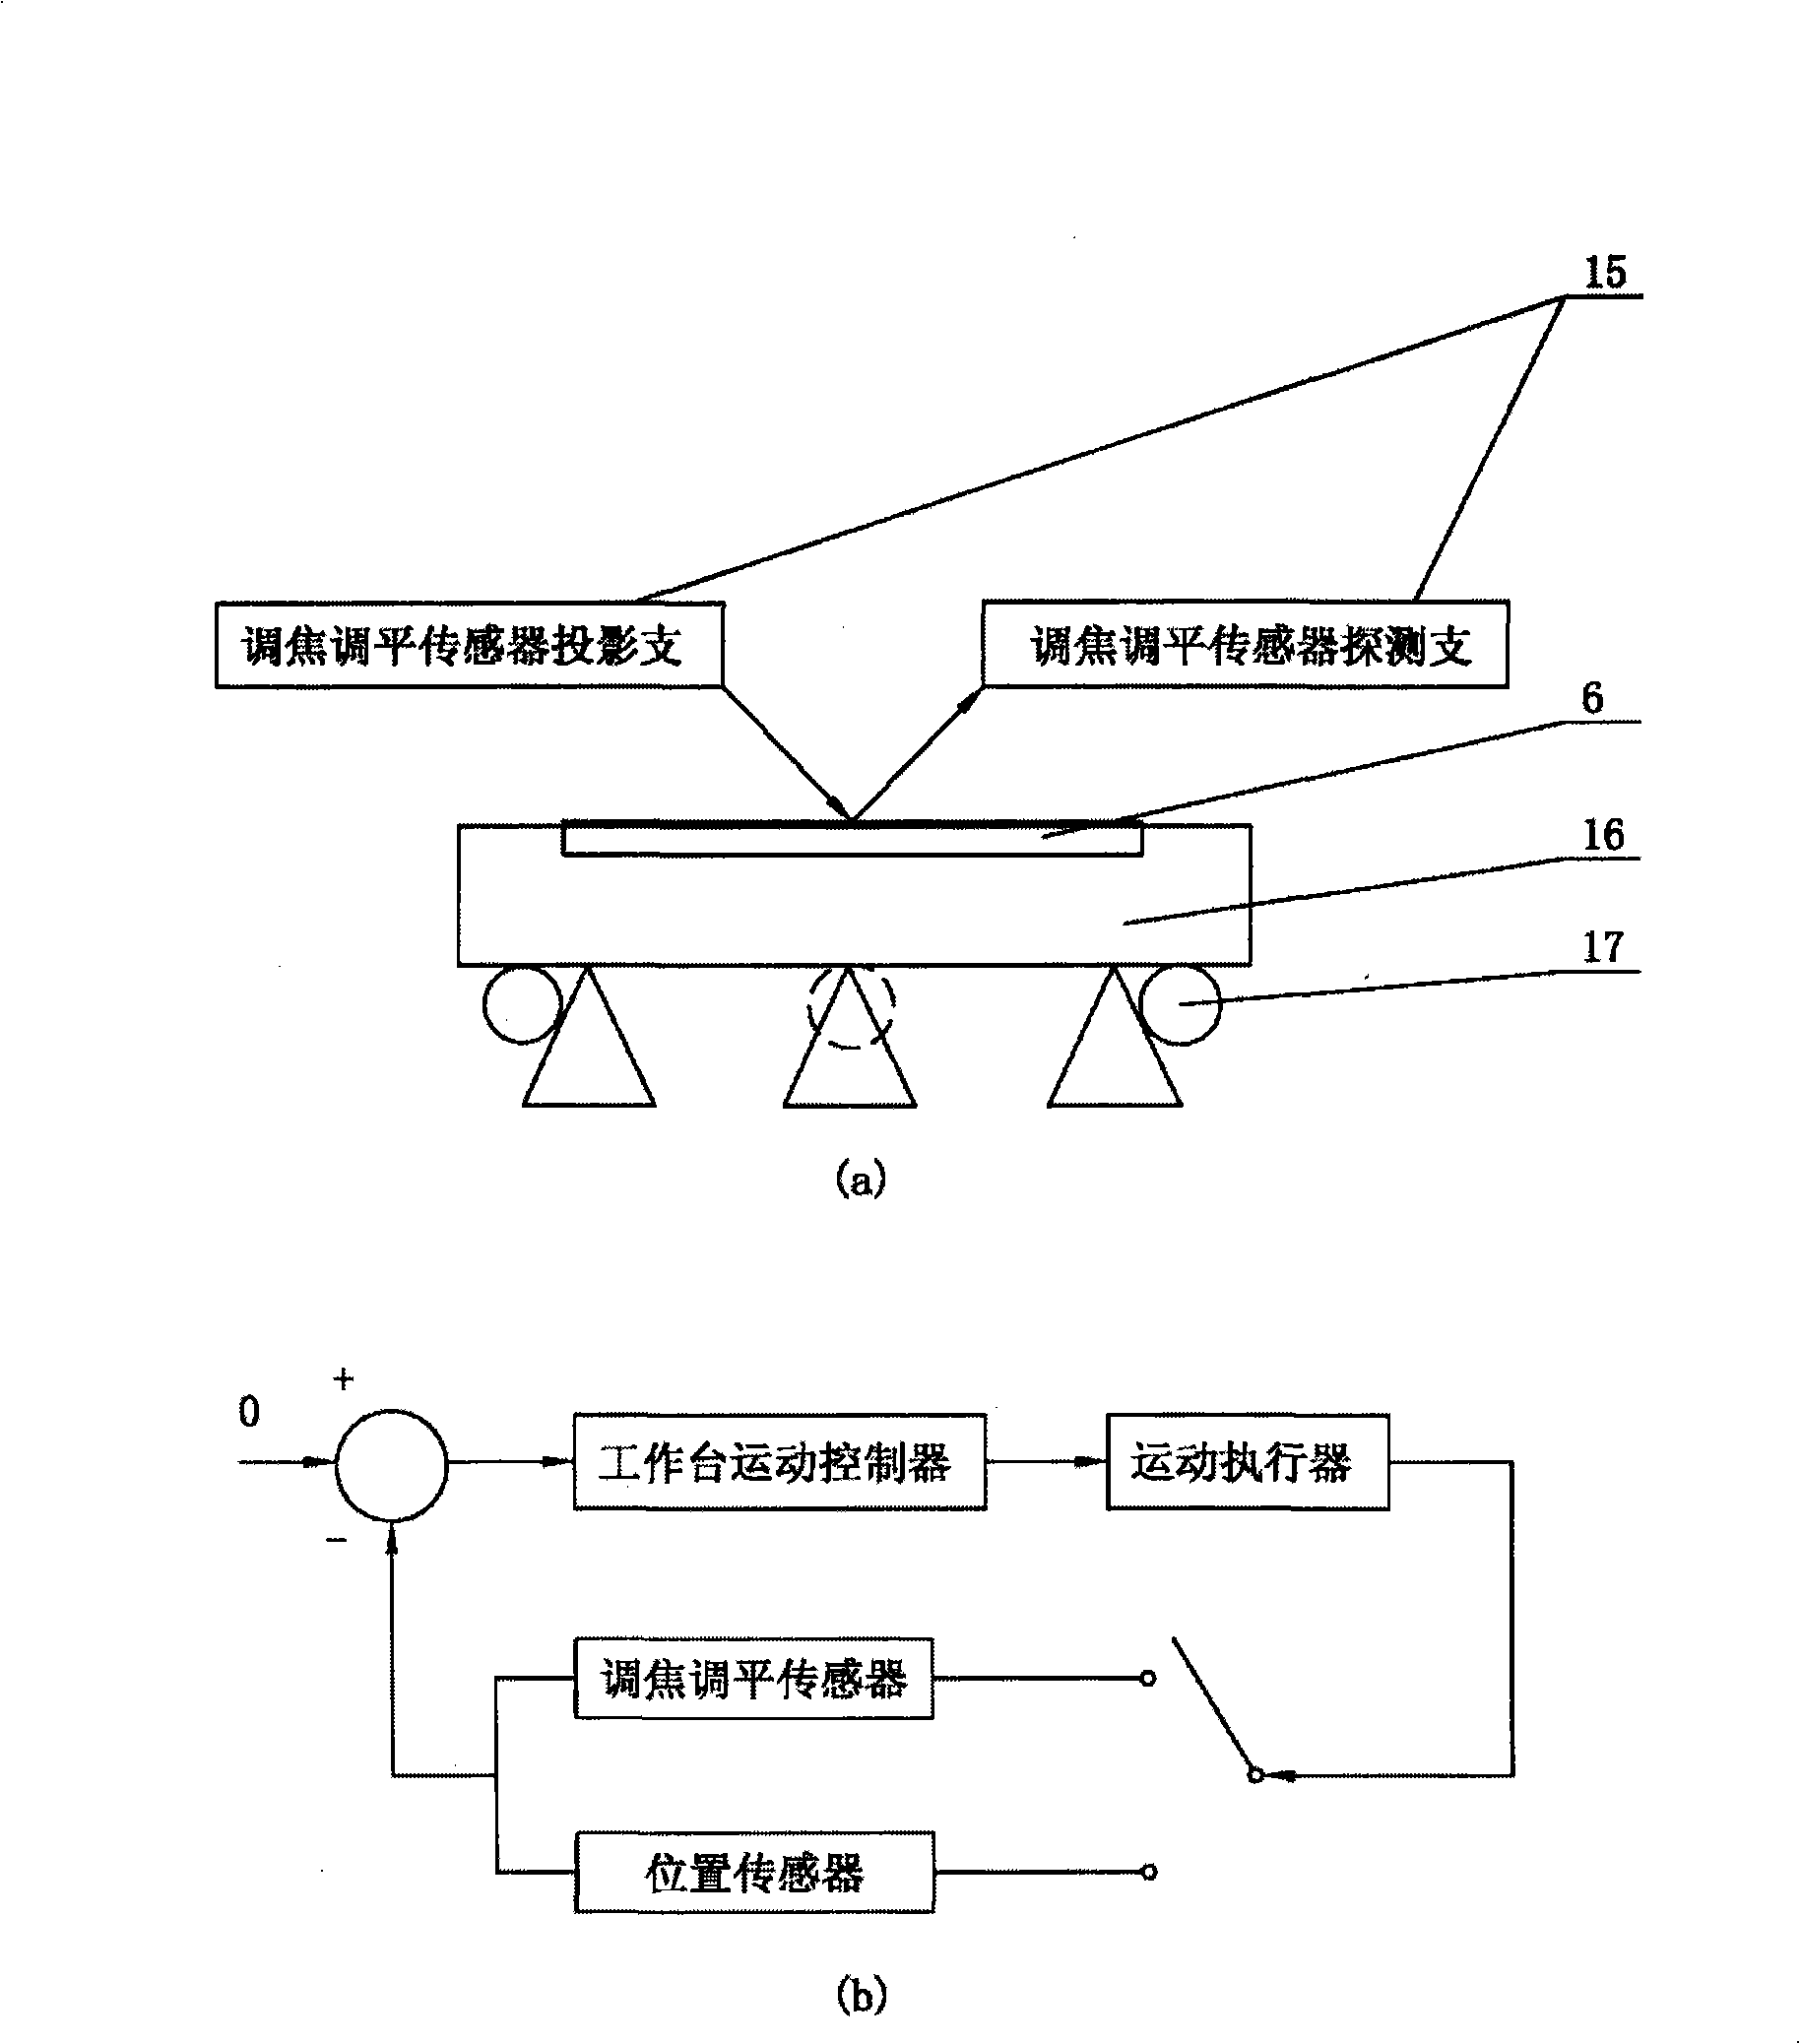 Method for self-judgment of measurement data reliability of self-adapting focusing and leveling sensor system